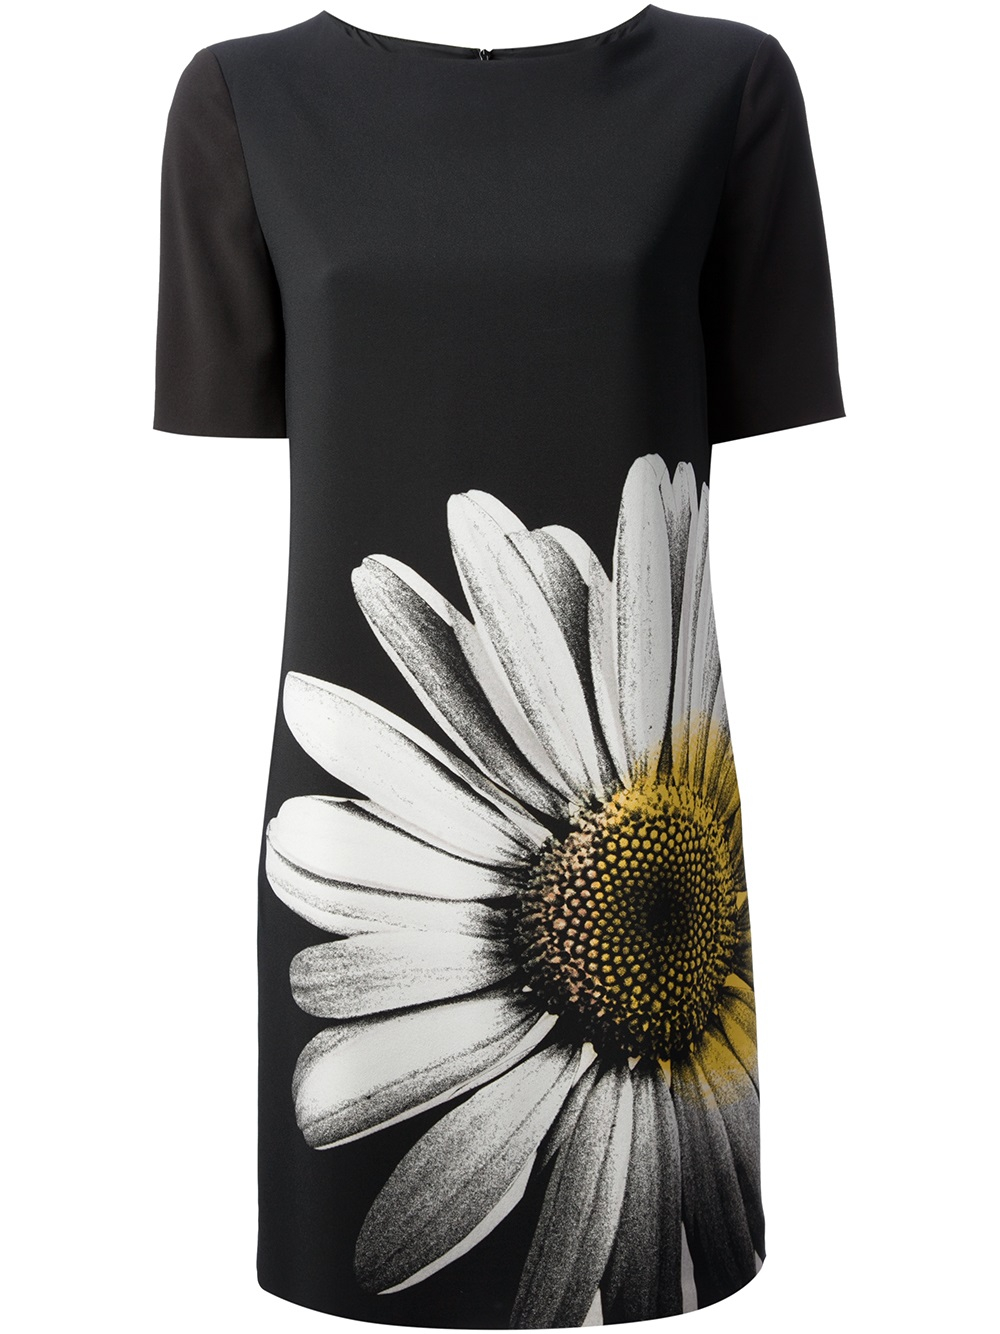 Lyst - Boutique Moschino Floral Print Dress in Black